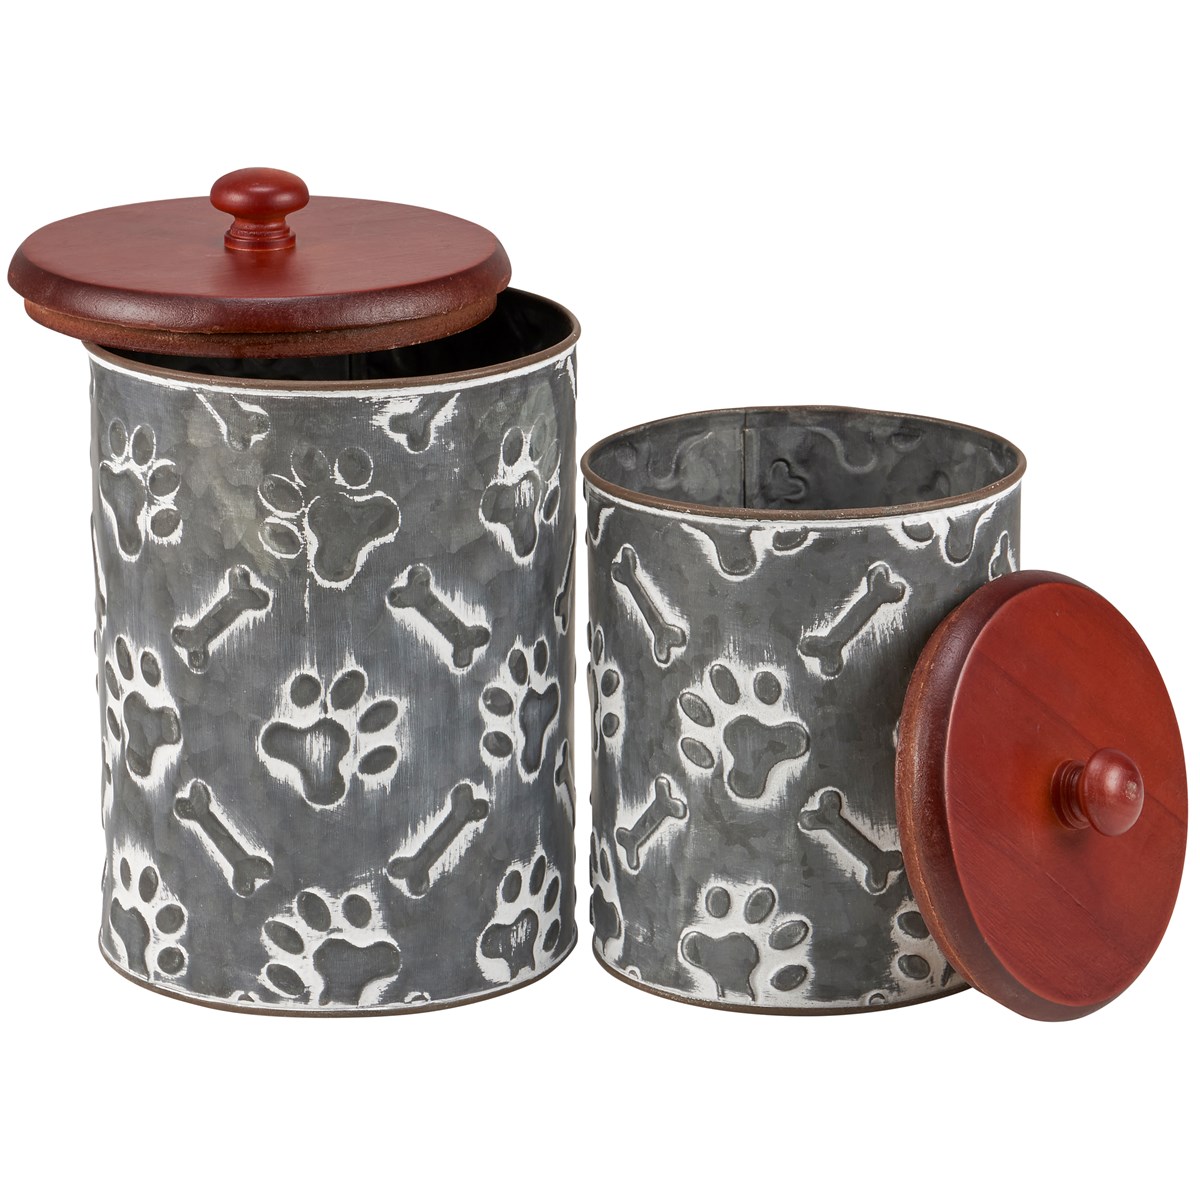 Paw Prints Canister Set - Metal, Wood